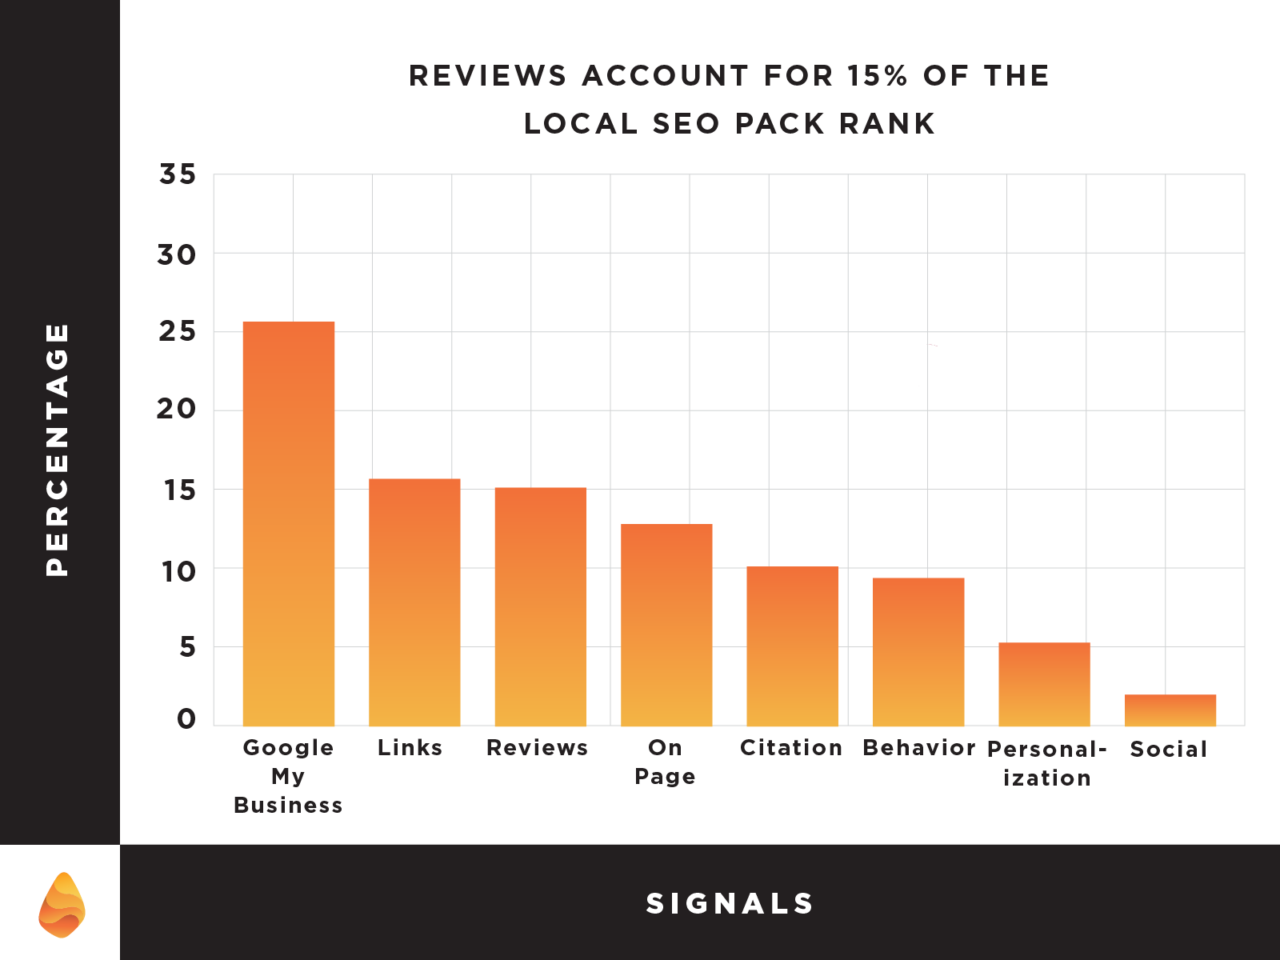 Graph showing that reviews account for 15% of the local SEO pack rank